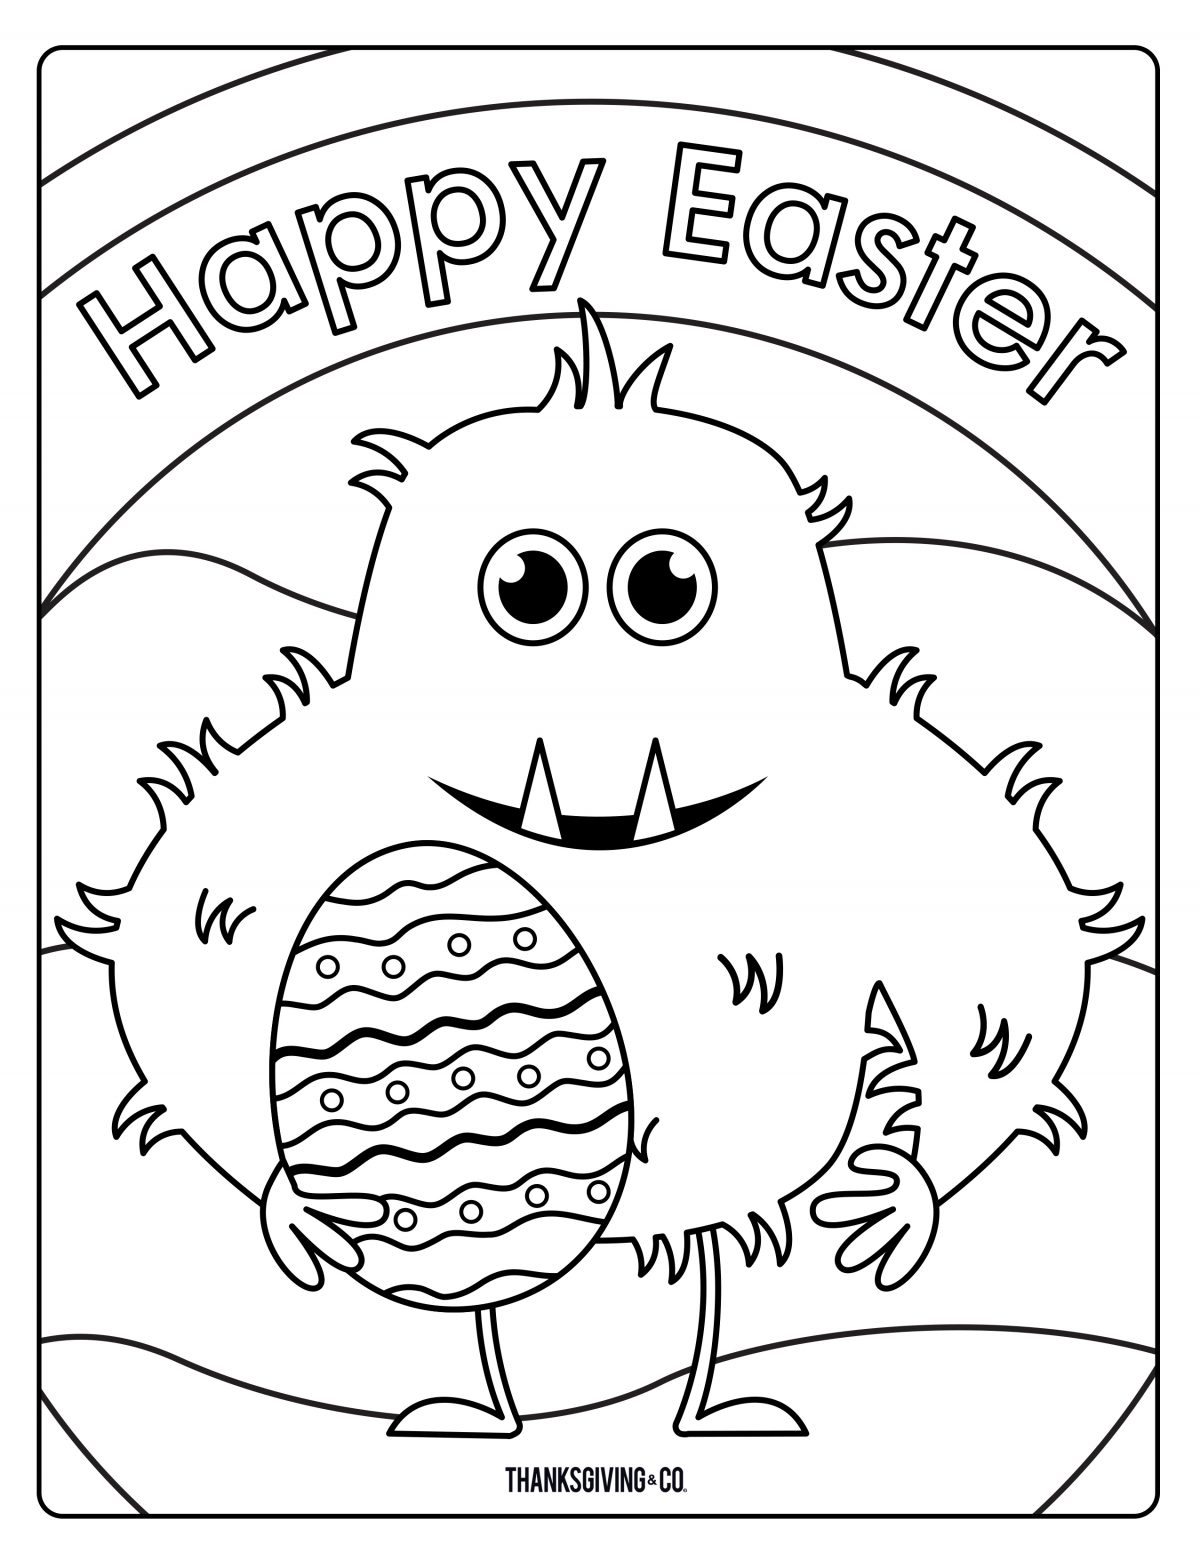 Monster Coloring Pages To Print Coloring Book Easter Bunny Template Free Coloring Pages To Print